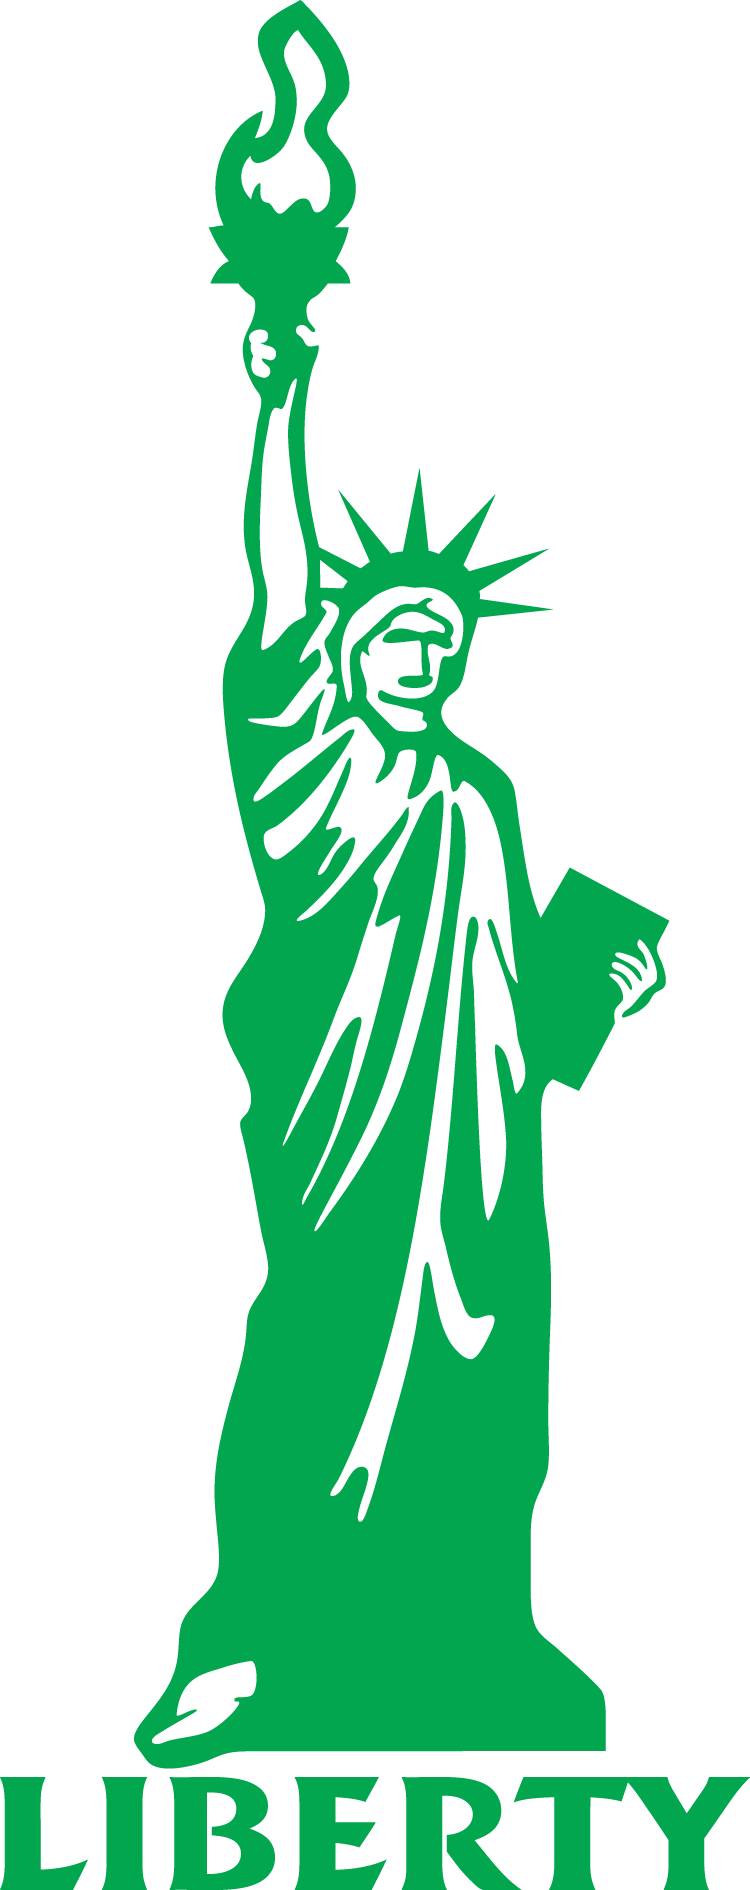 Liberty Statue Png - ClipArt Best